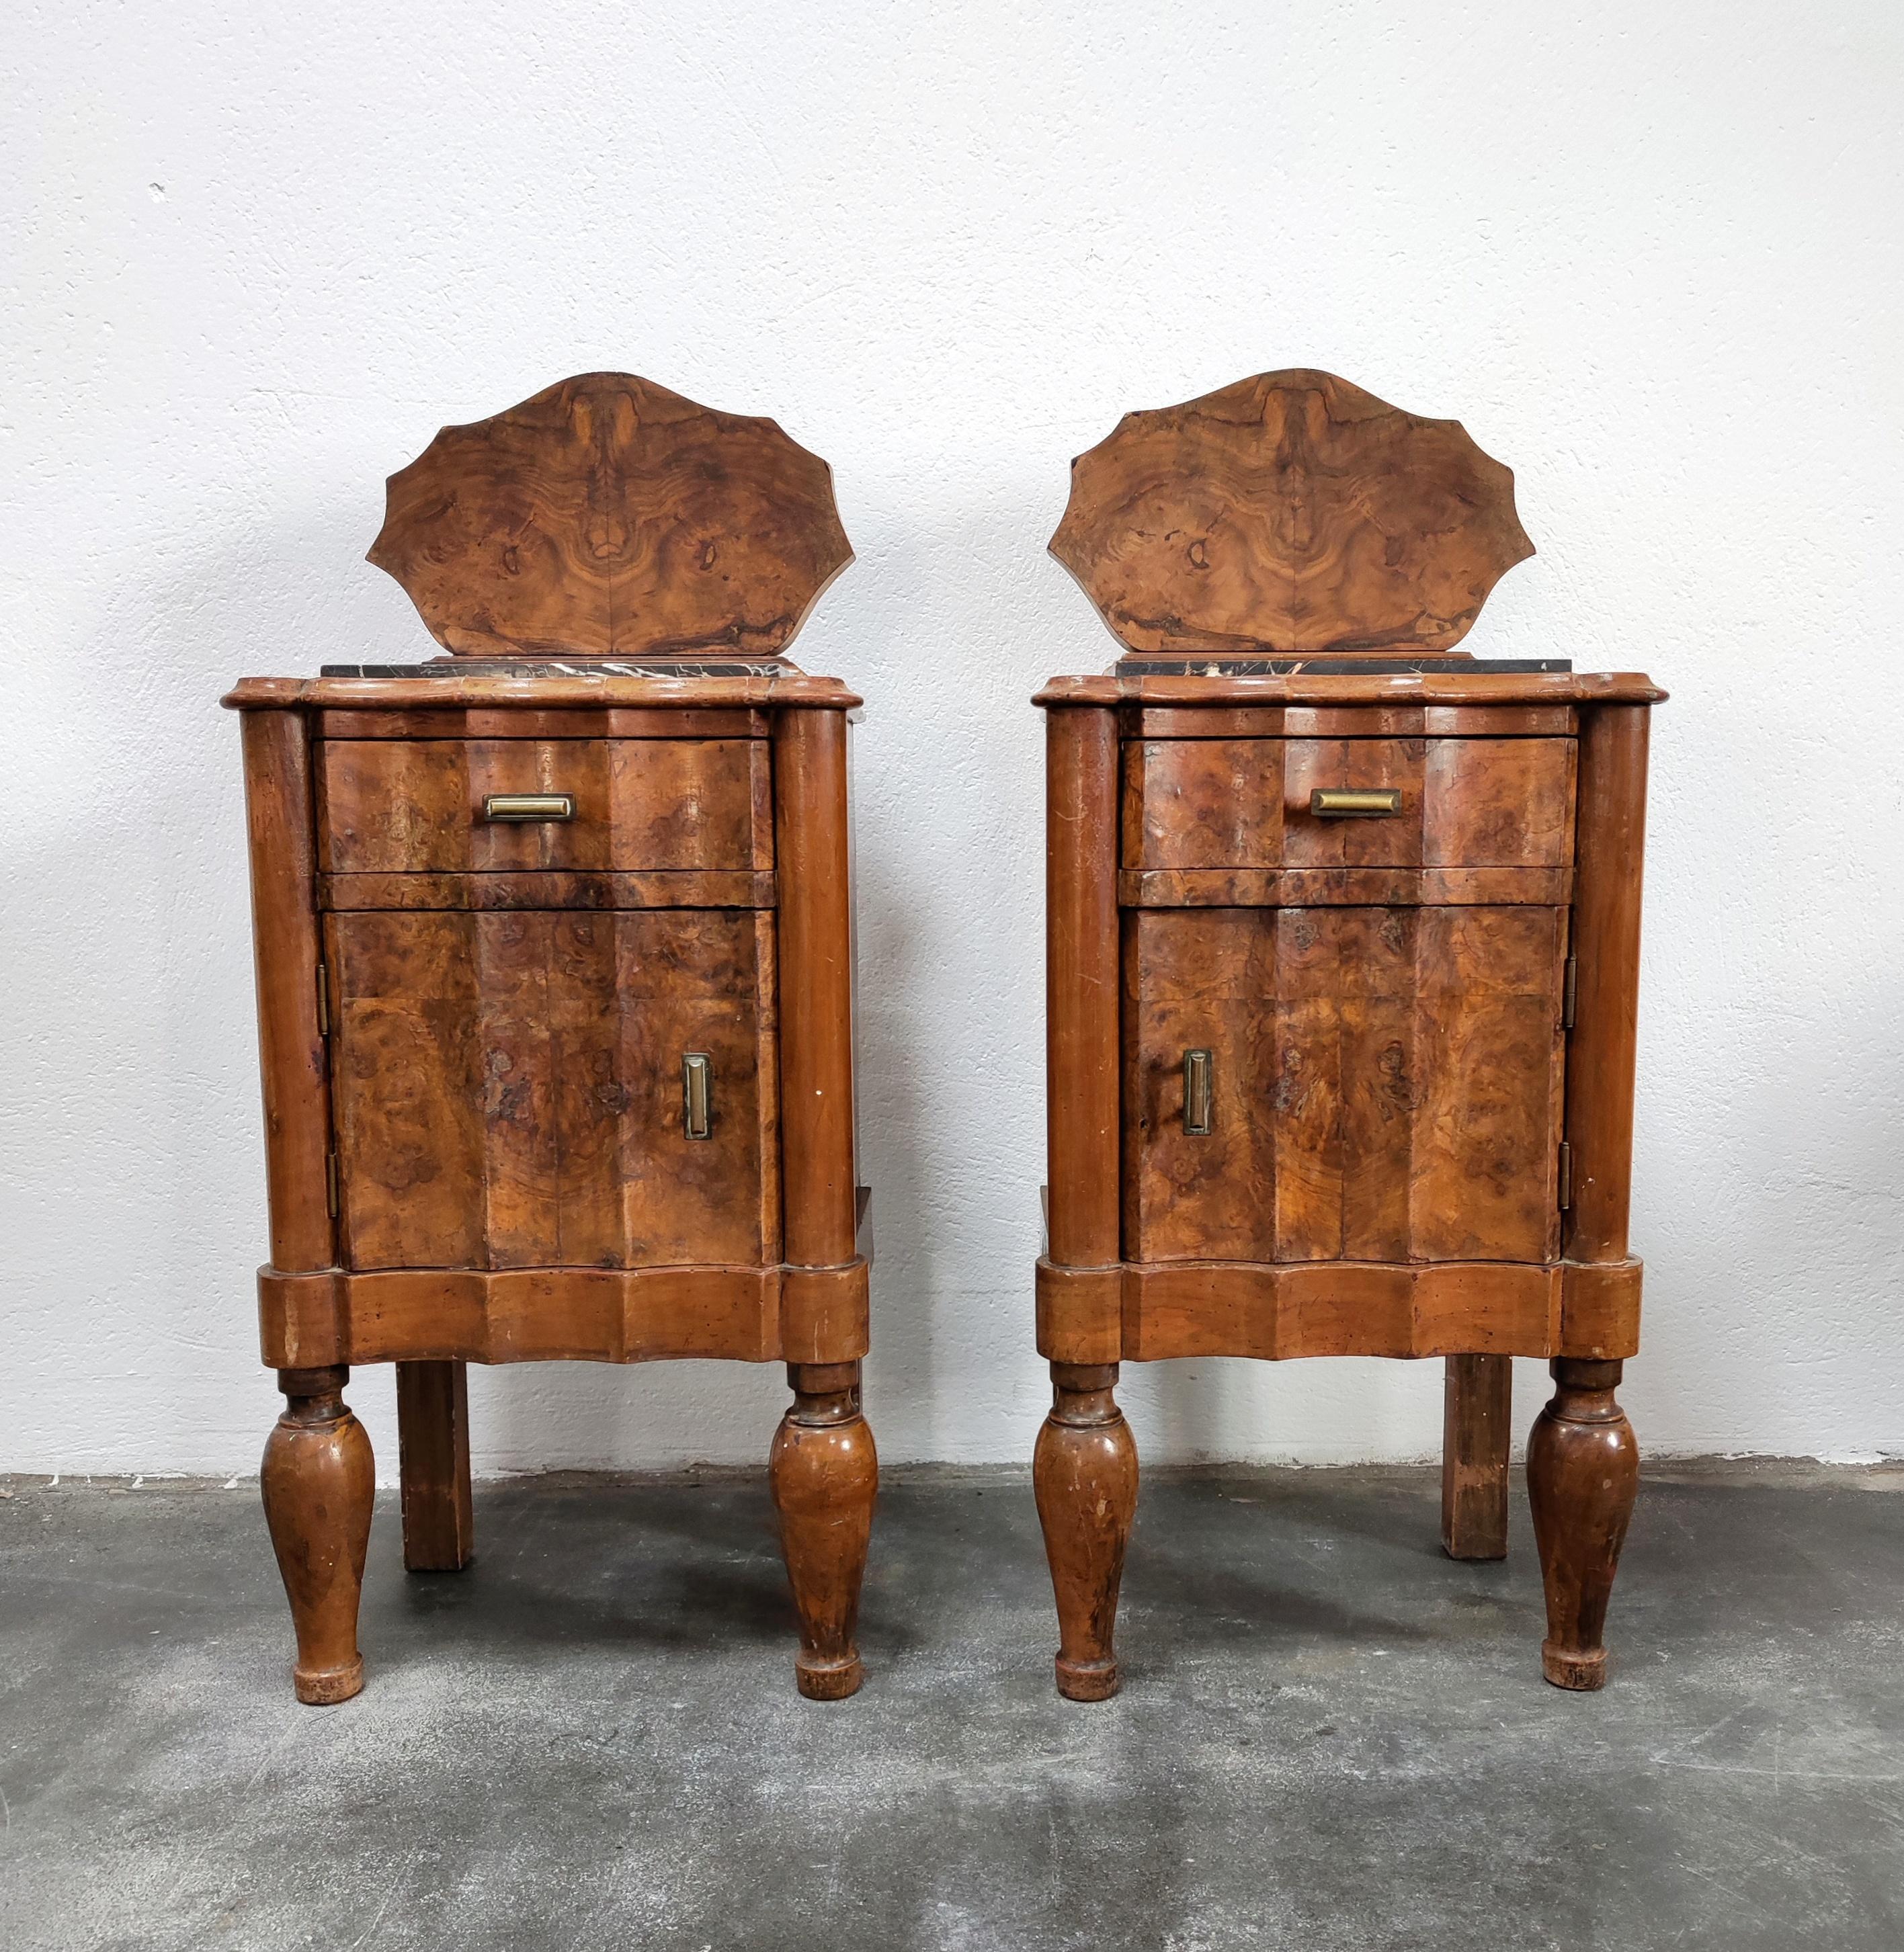 Pair of Pettite Art Deco Nightstands in Walnut Burl and Marble, Italy, 1920s For Sale 1